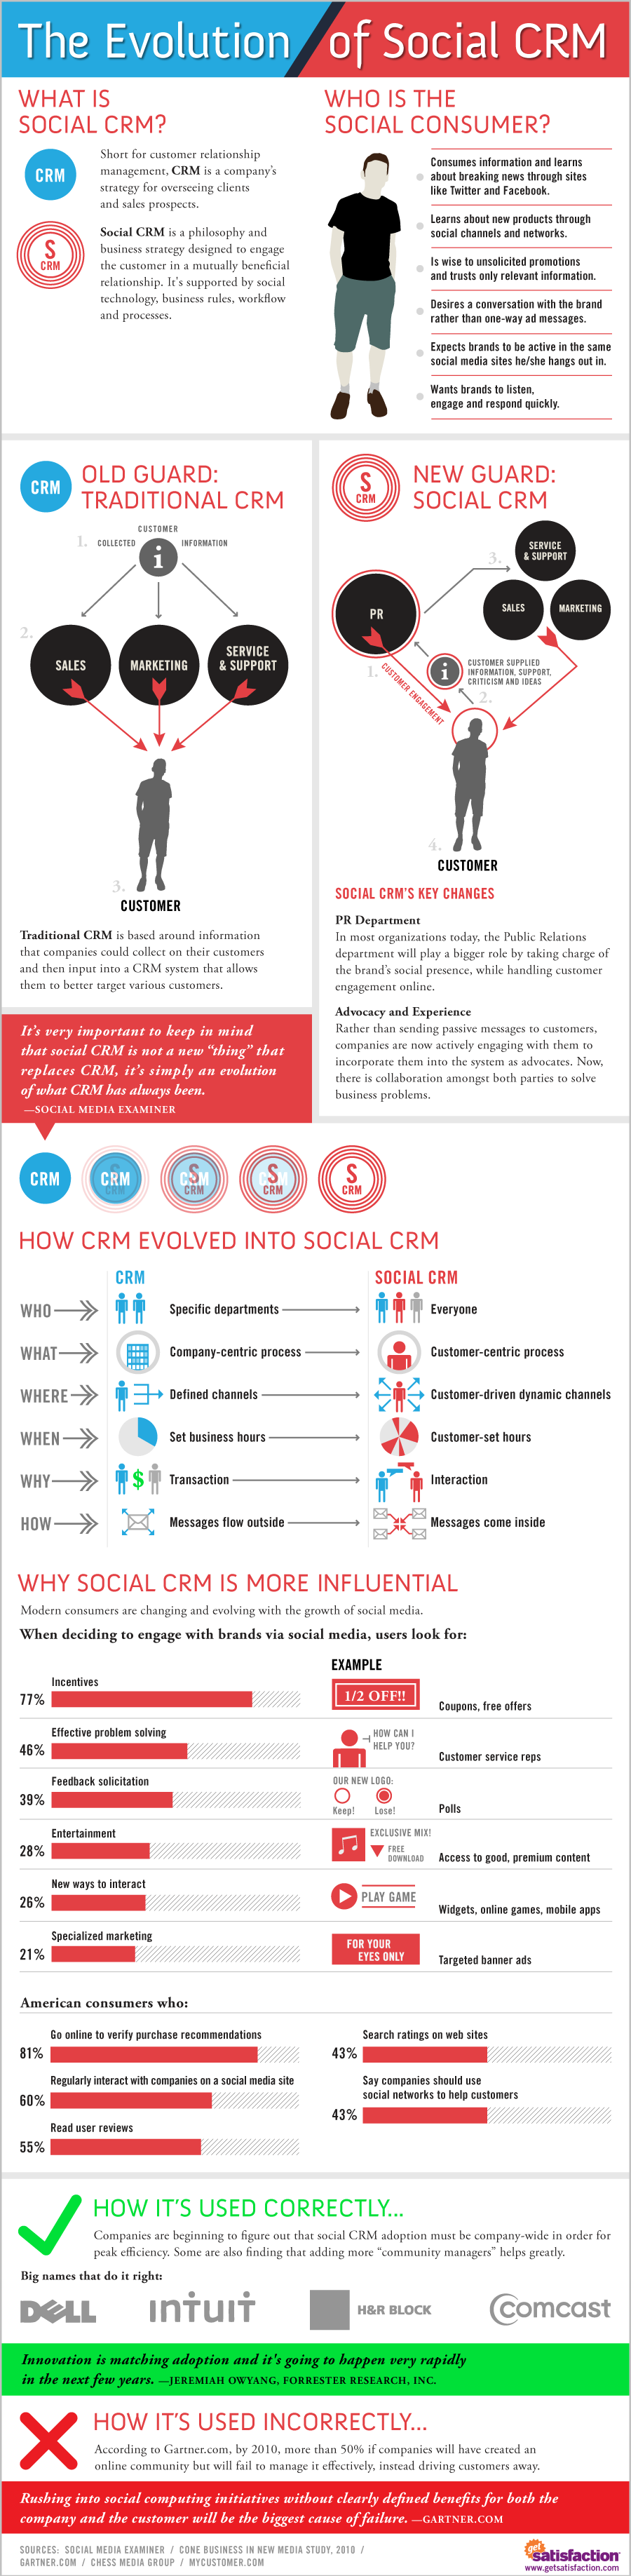 social crm evolution 4 Steps How Closed Loop Marketing Can Help you Grow your Revenue